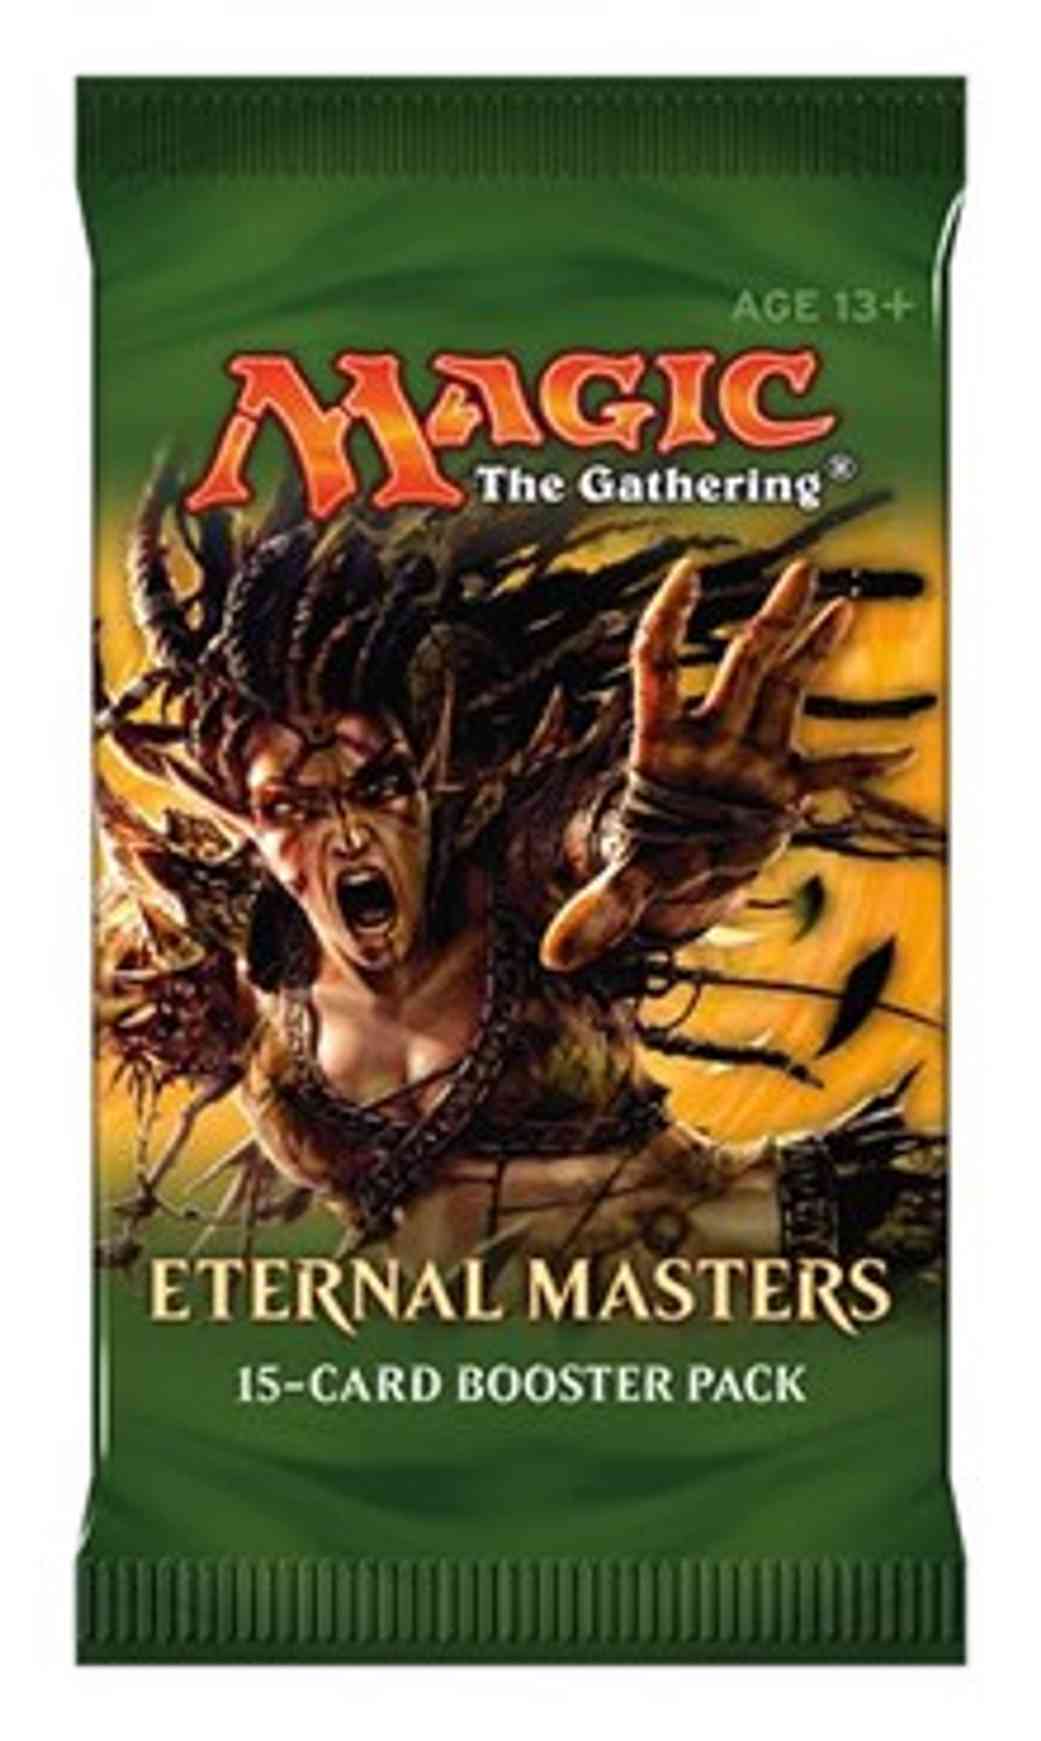 Eternal Masters Booster Pack magic card front